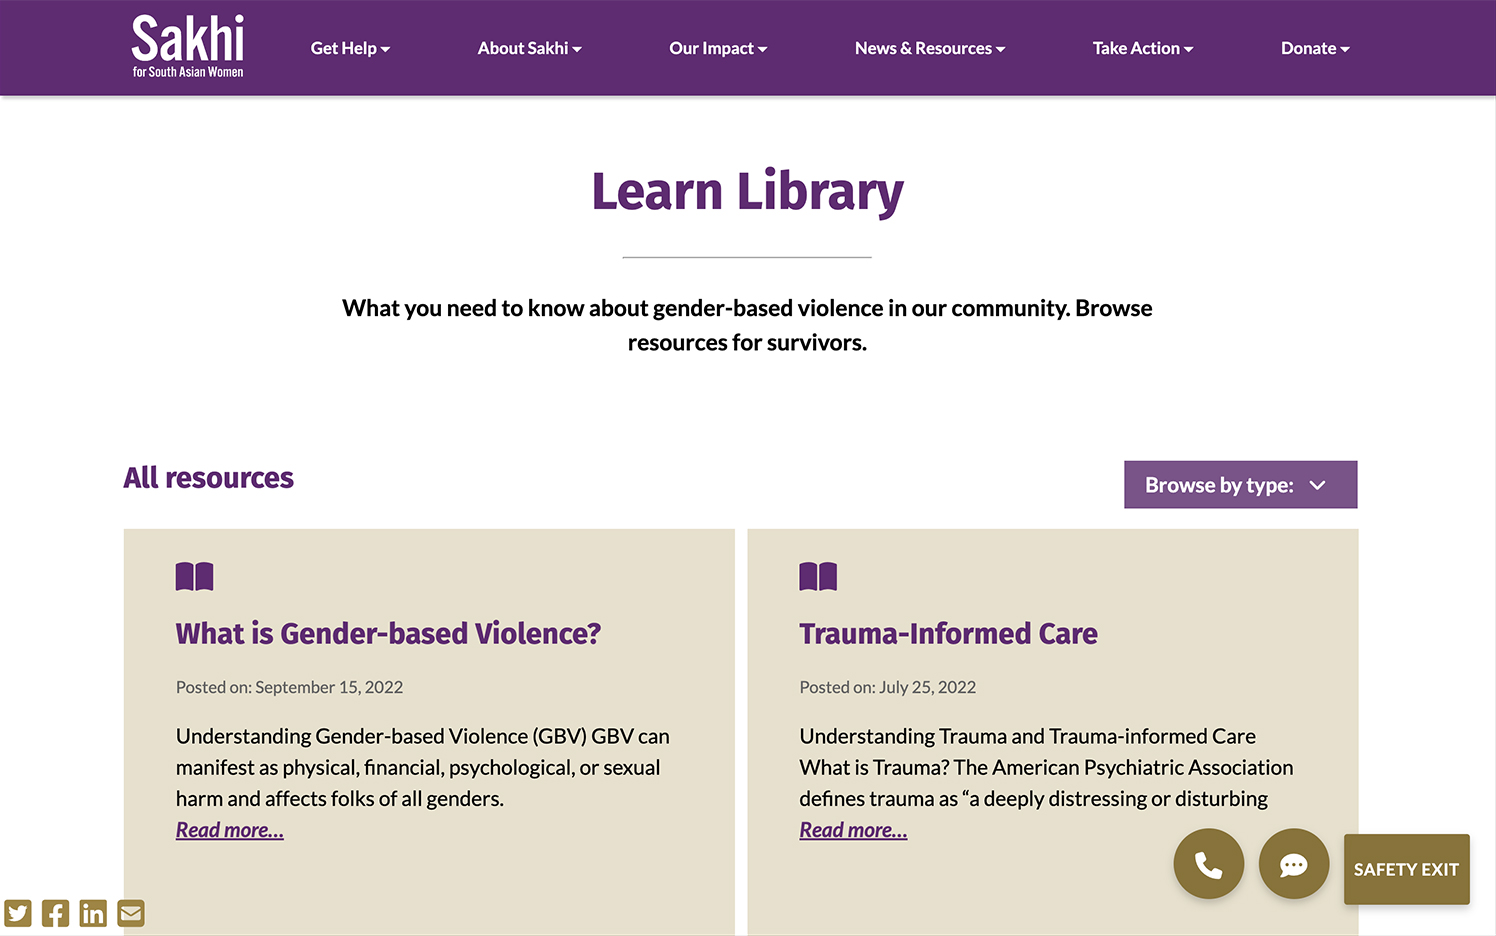 Sakhi website Learn Library page